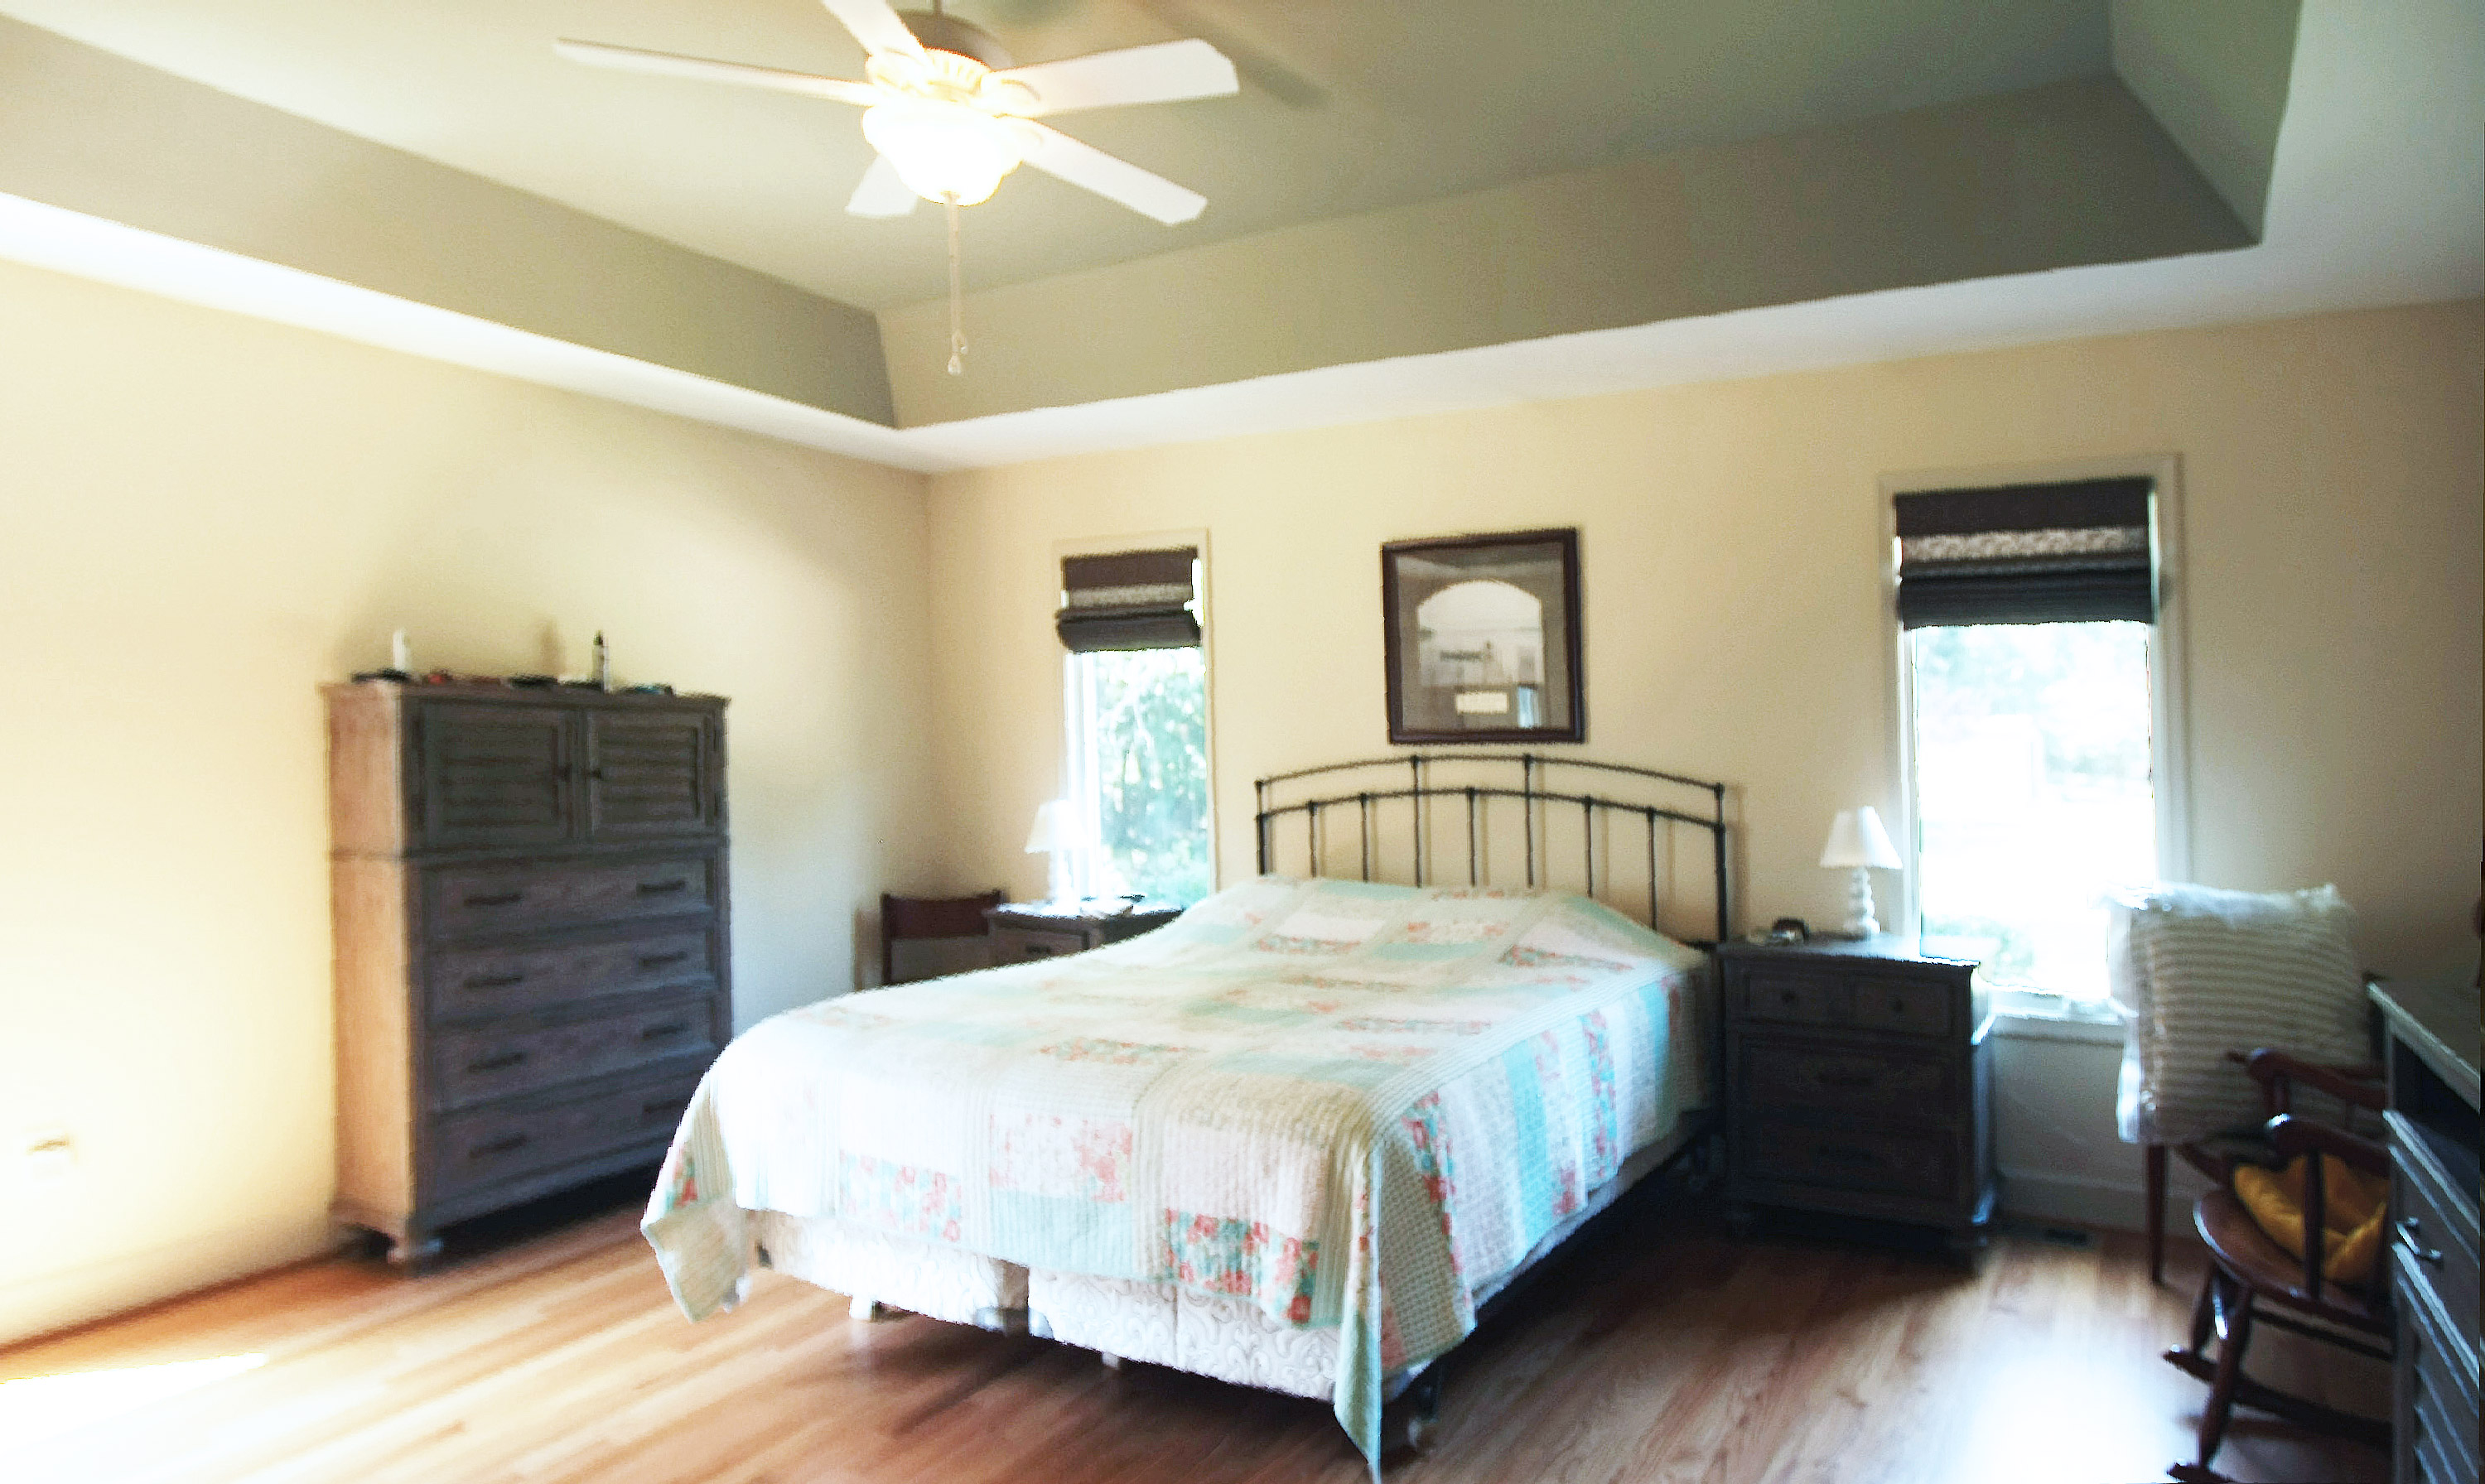 Bedroom with Tray Ceiling